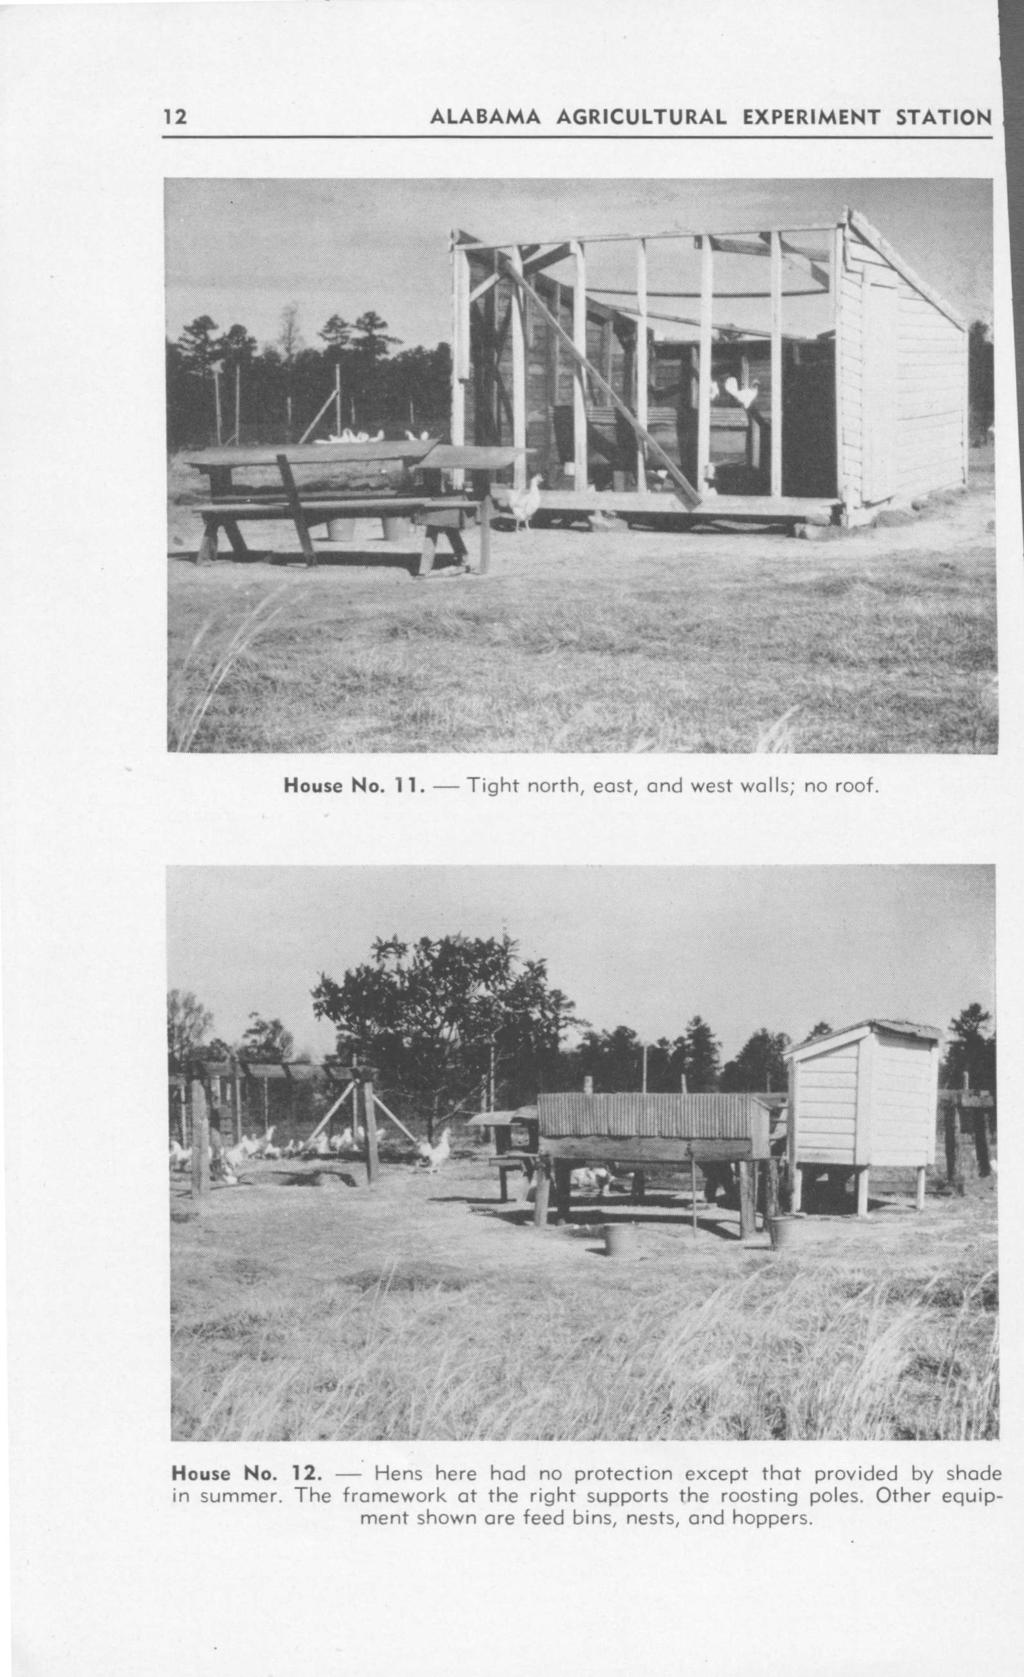 ALABAMA AGRICULTURAL EXPERIMENT STATION r~re:a~trsr- K House No. ii. Tight north, east, and west wall. no roof. ~dls t "~~ rpt A 4~' * -t Pb 2 House No. 12.